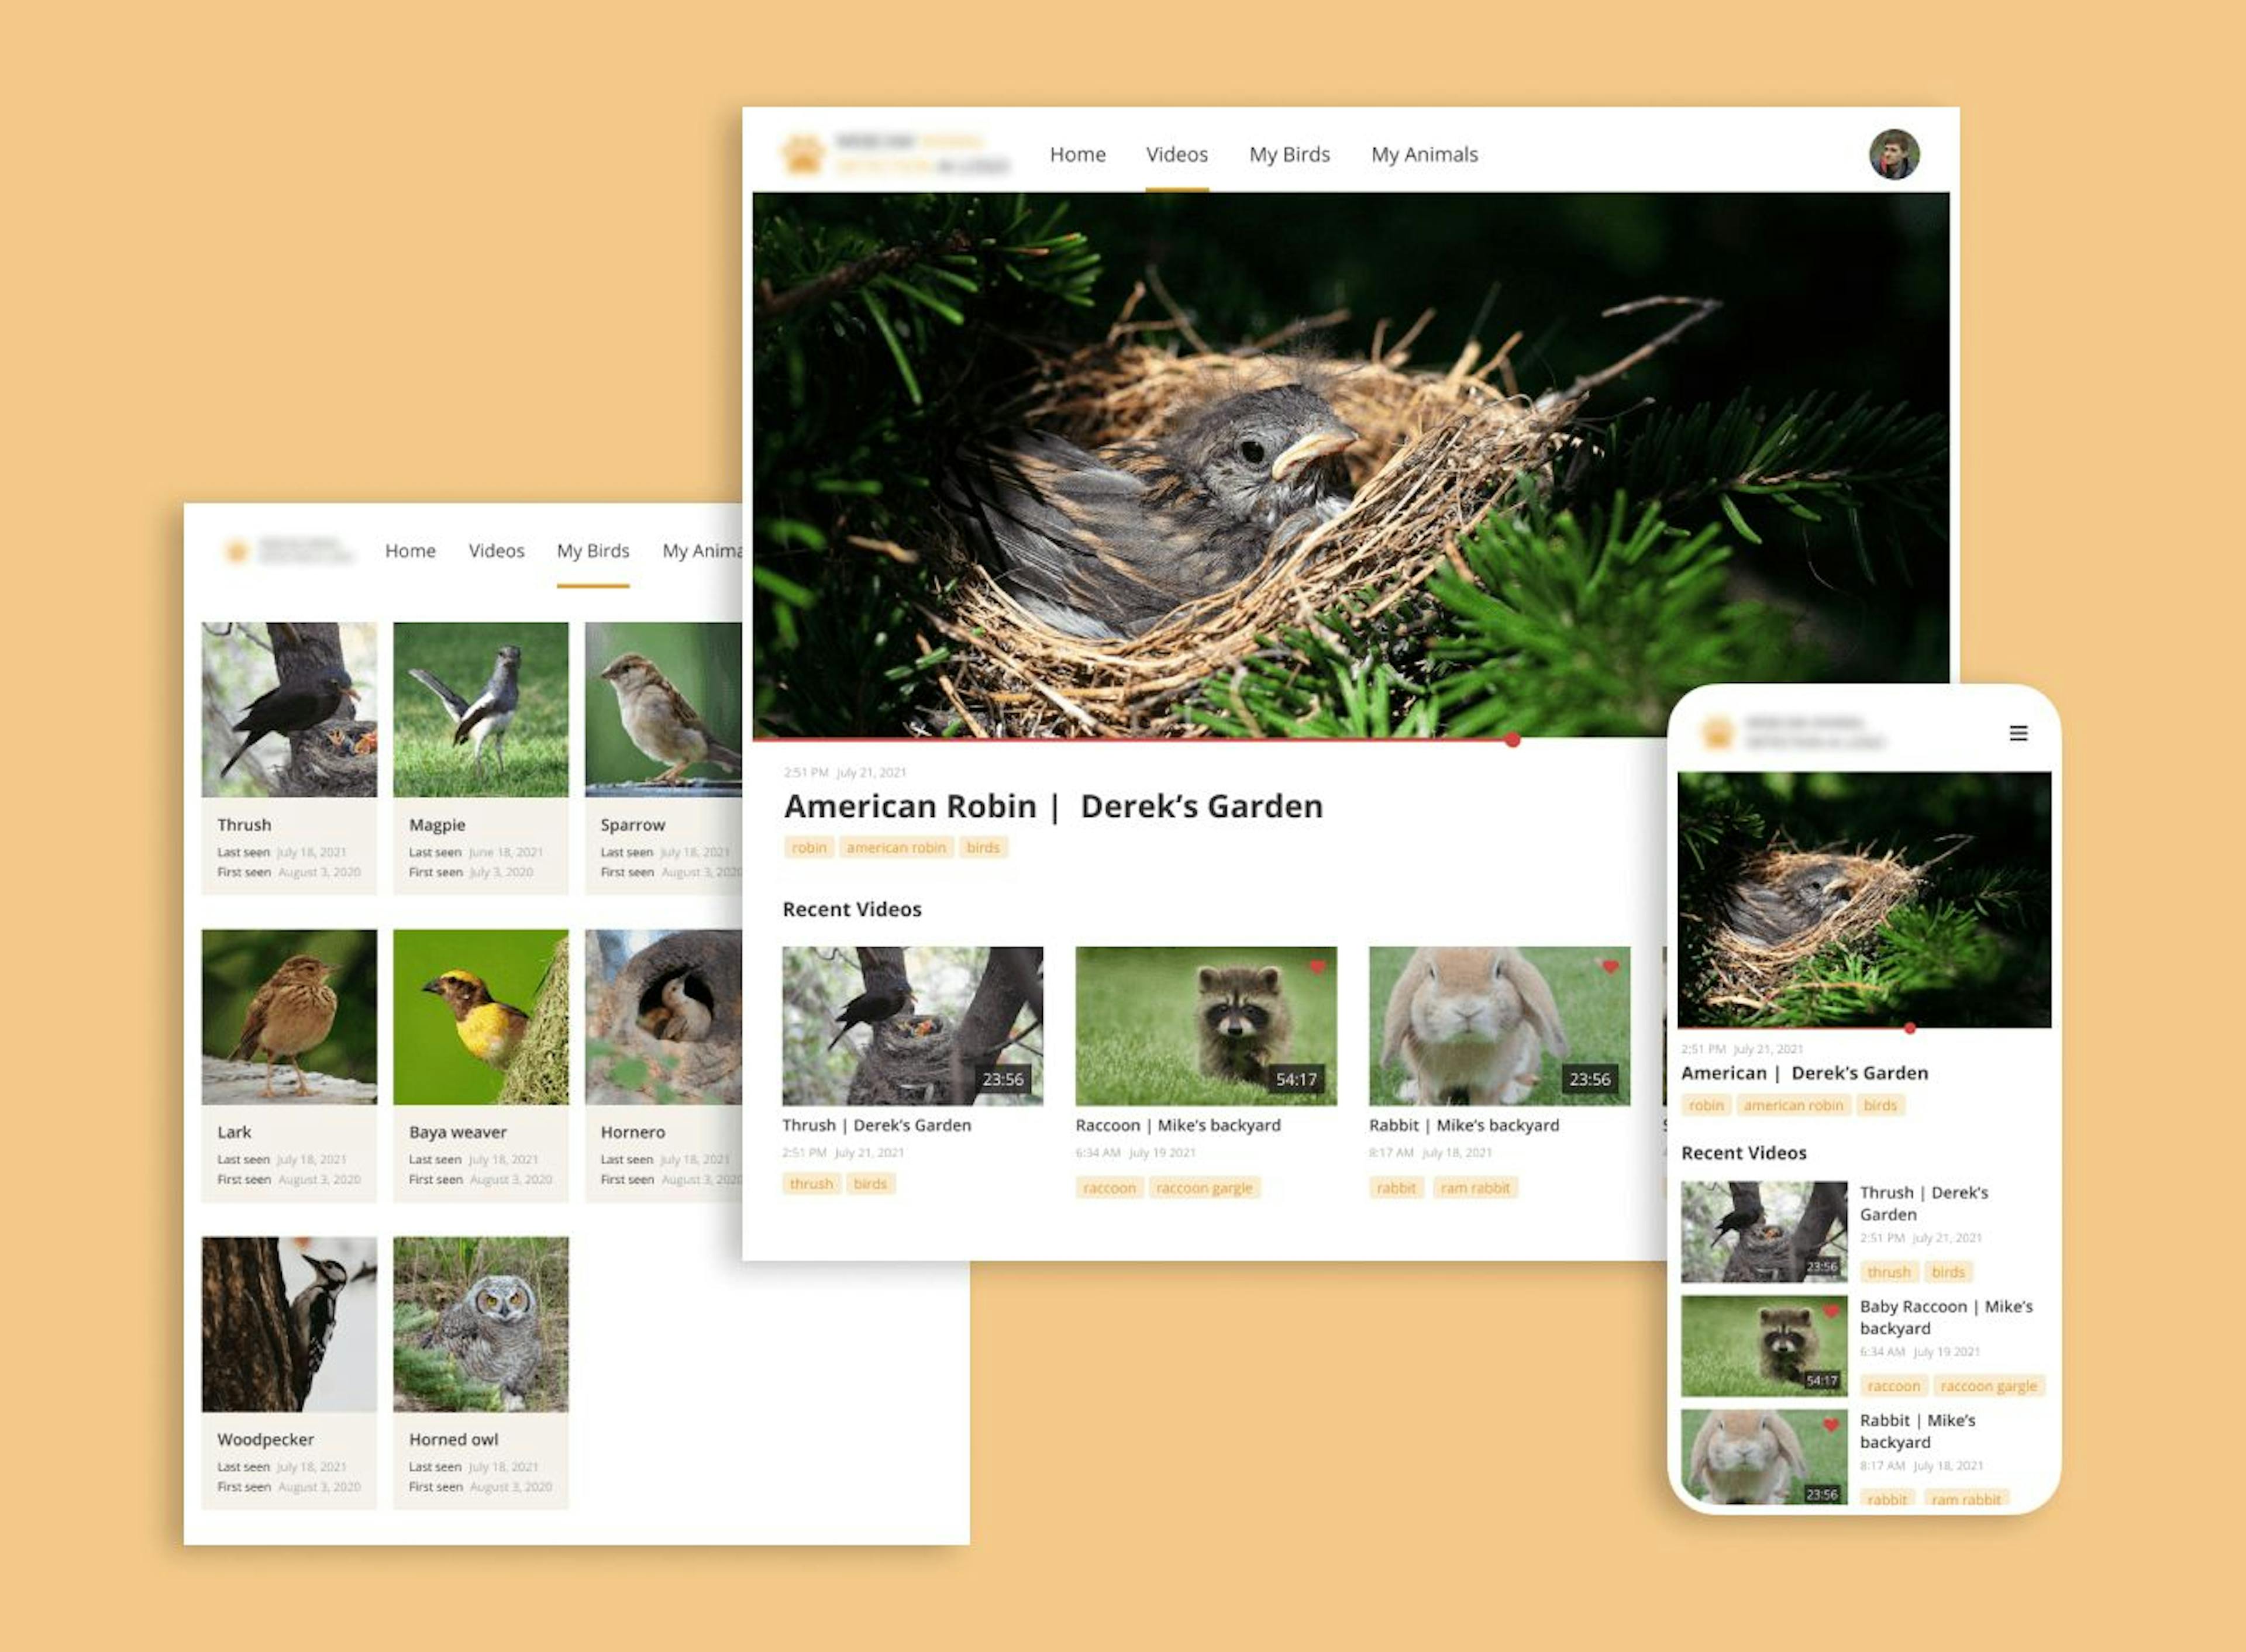 Birdsy is a AI-powered service which detects birds and small mammals in real time and records videos for the users to watch later